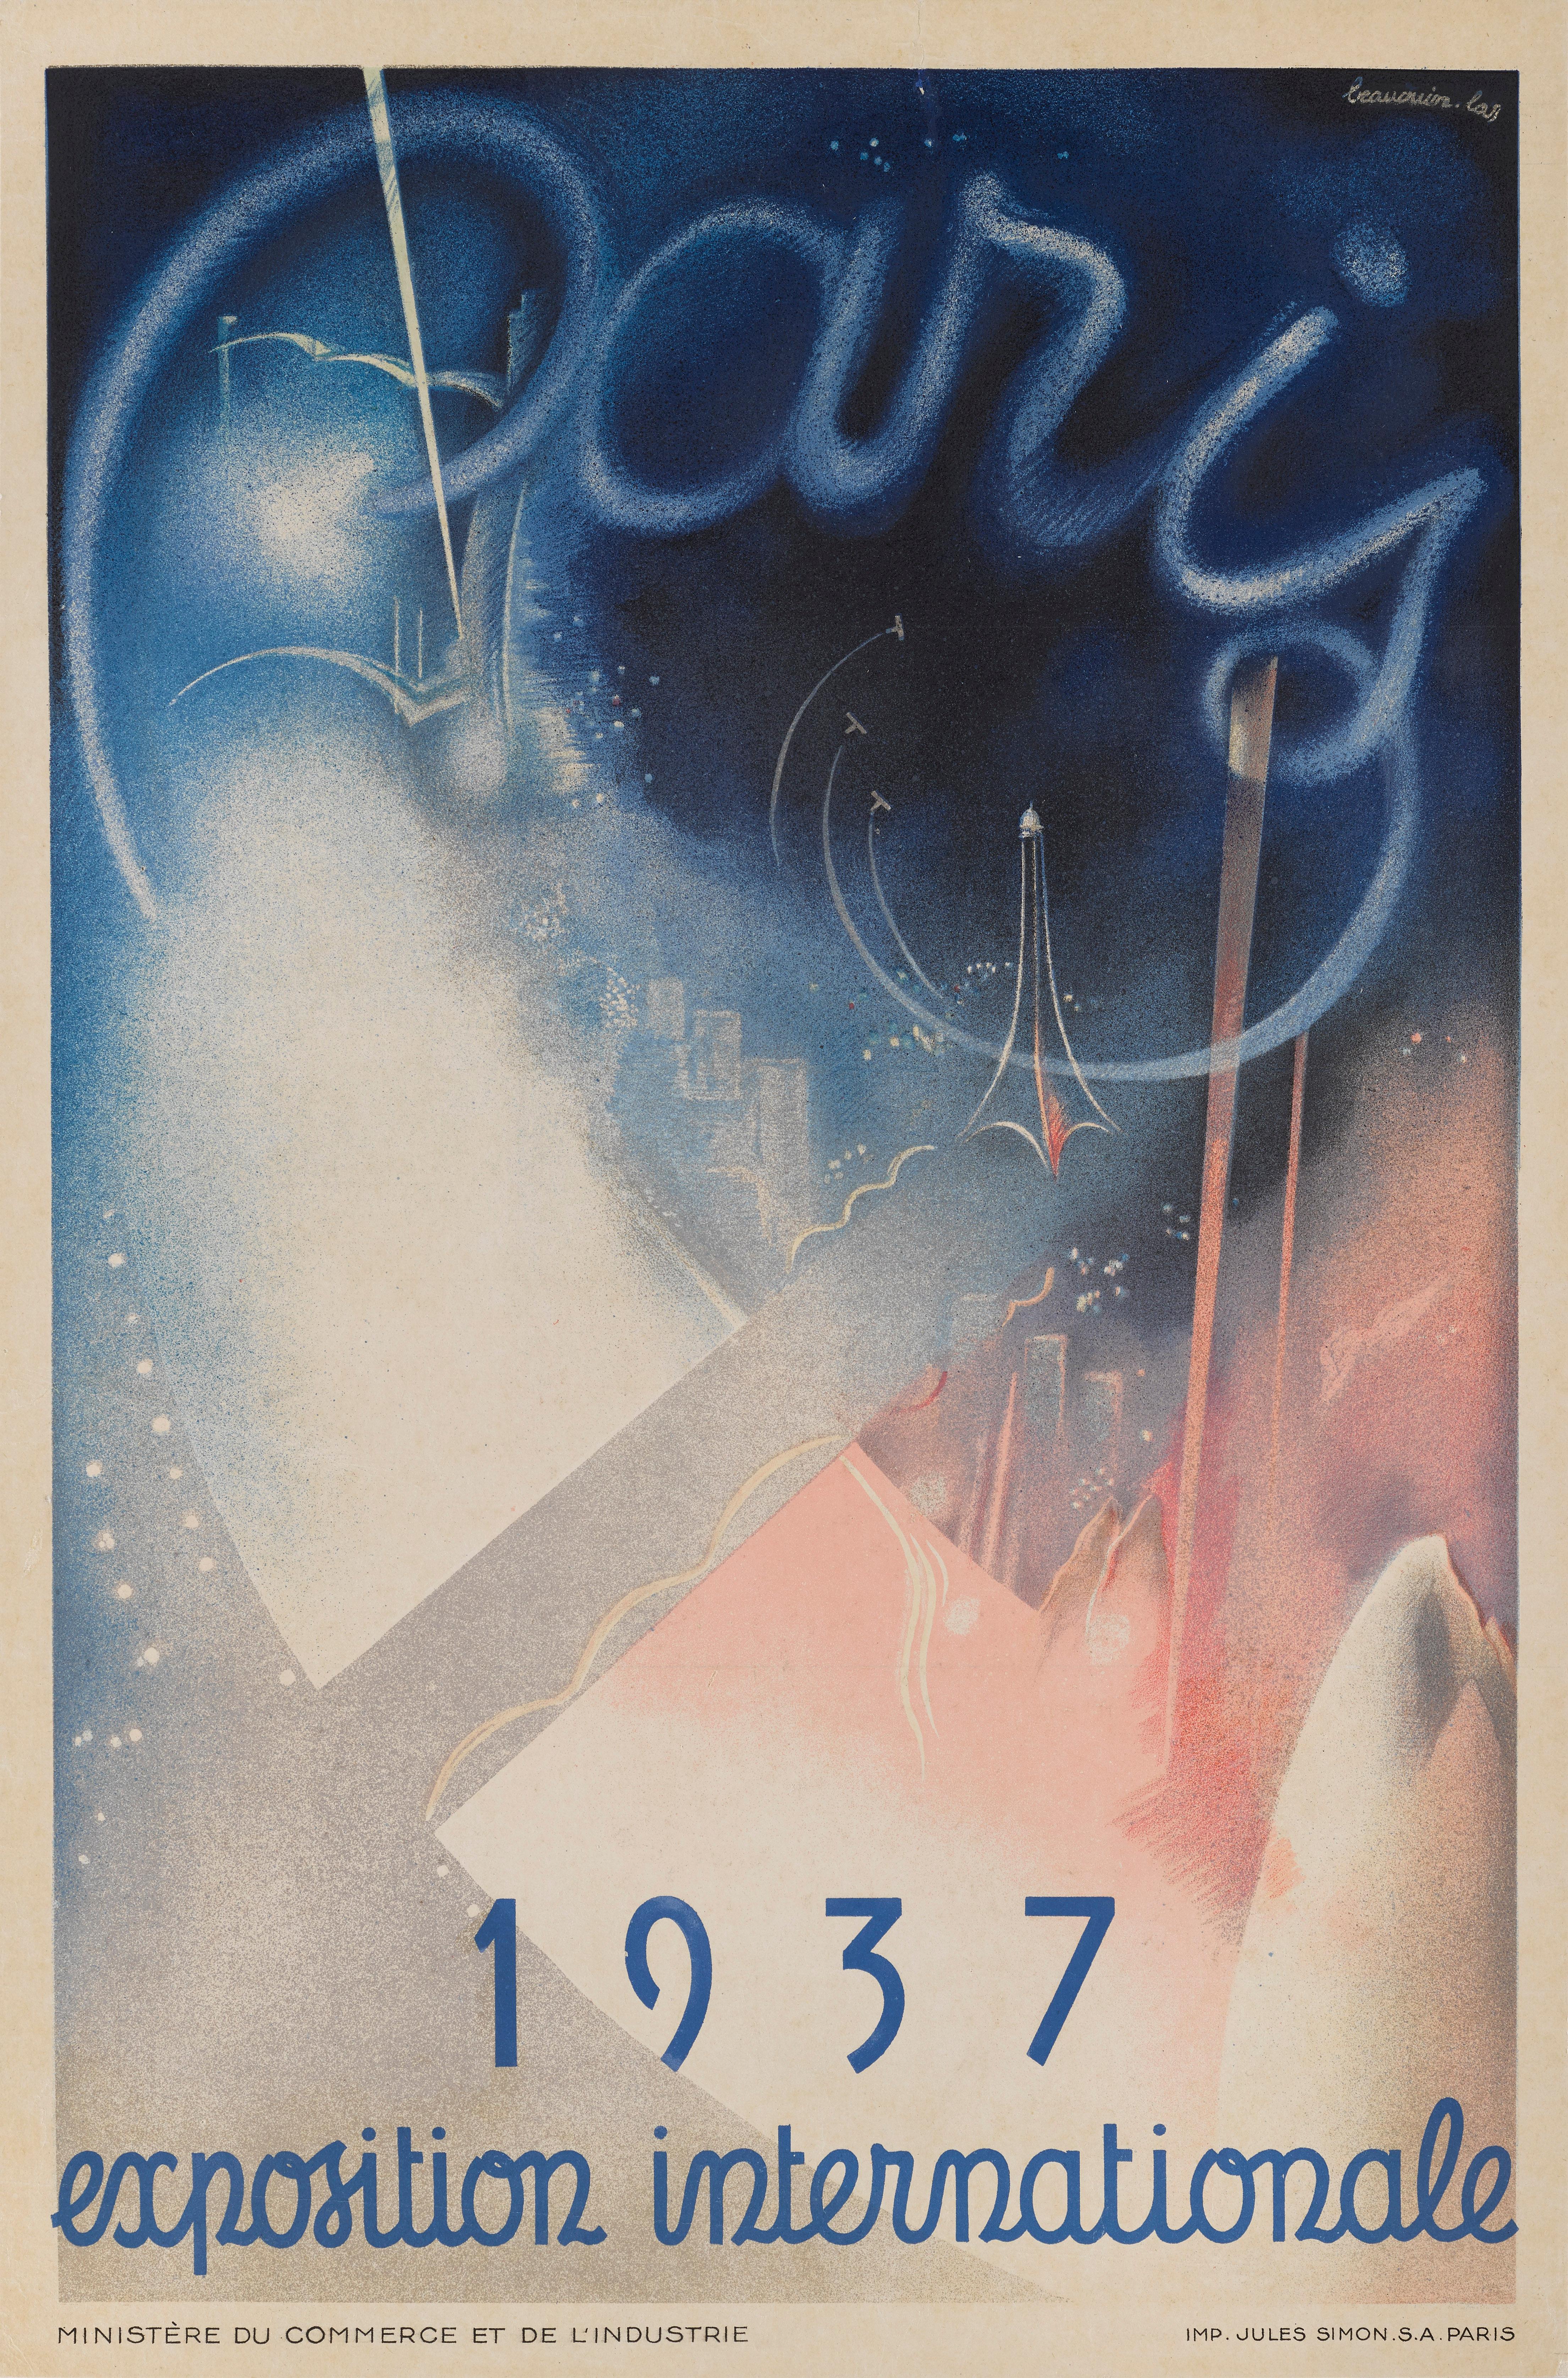 Original French poster for the Exposition International in Paris, 1937.
This award-winning Art Deco design was created by Eugene Beaudoin (1898-1983) and Marcel Lods (1891-1978).  This is the smallest of 3 formats originally printed.